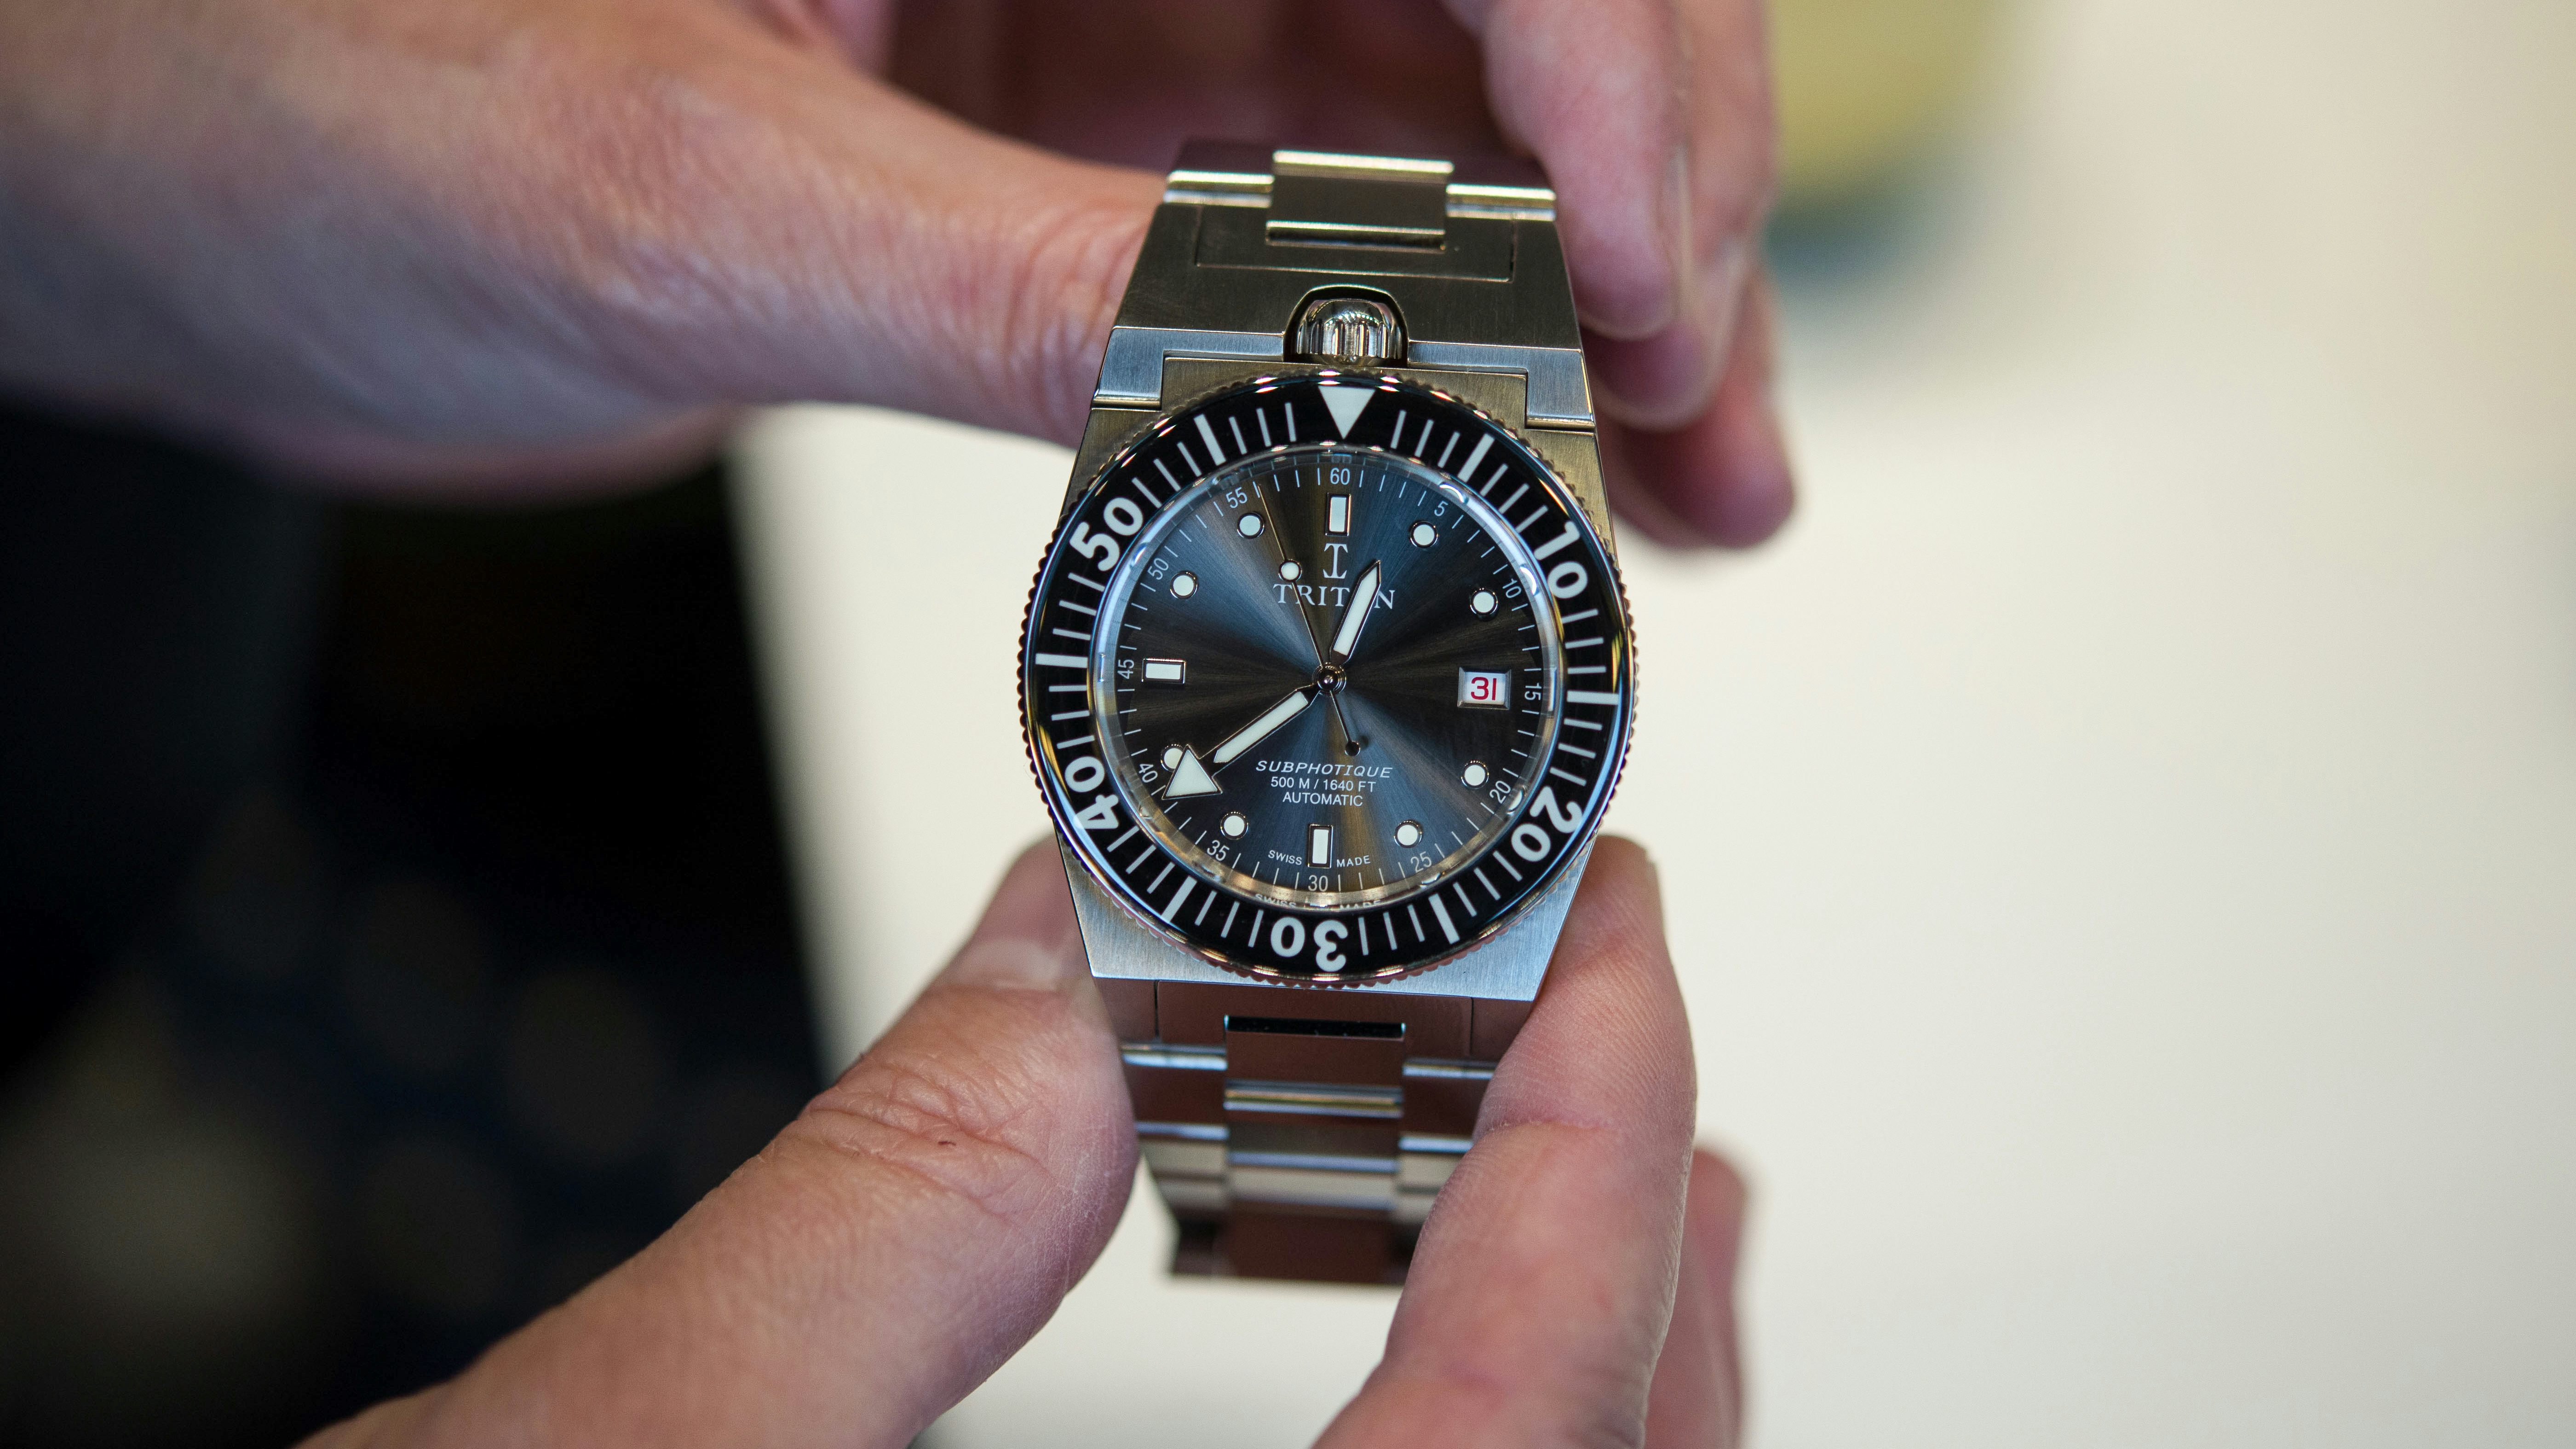 Hands-On with the Triton Subphotique - Worn & Wound